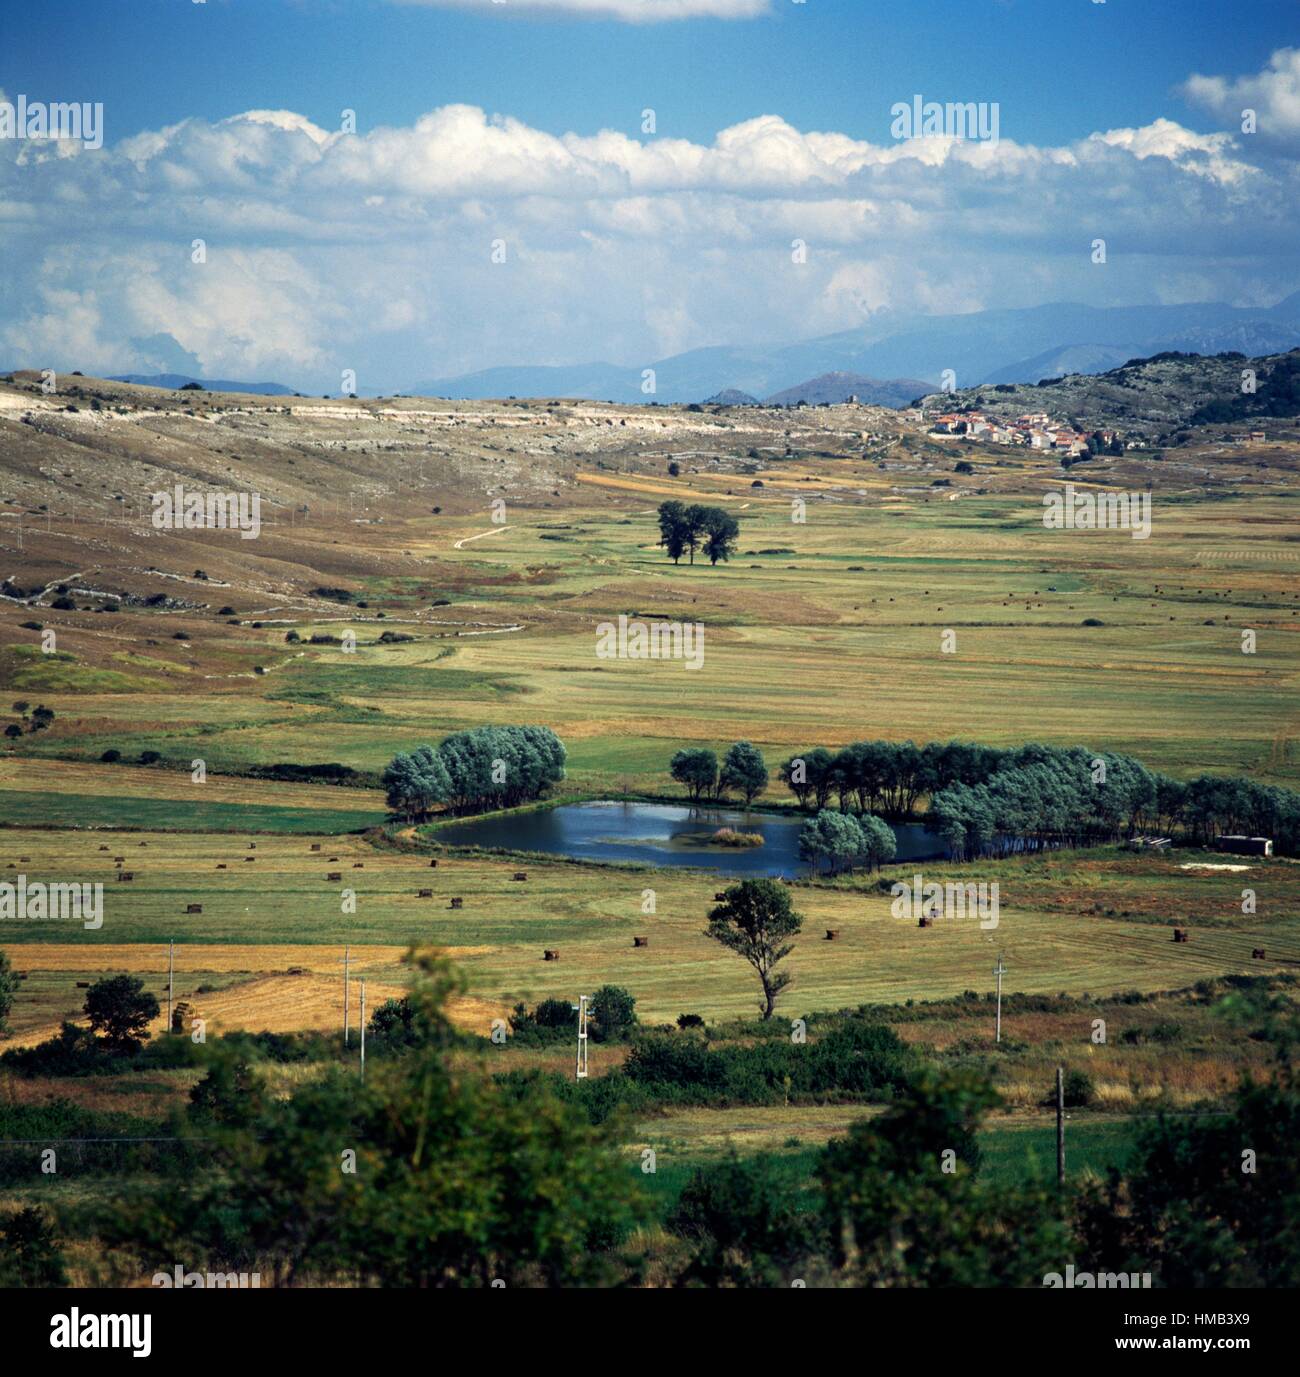 A pool of water on the Rocche plateau, with the village of Rocca di Mezzo in the background, Abruzzo, Italy. Stock Photo